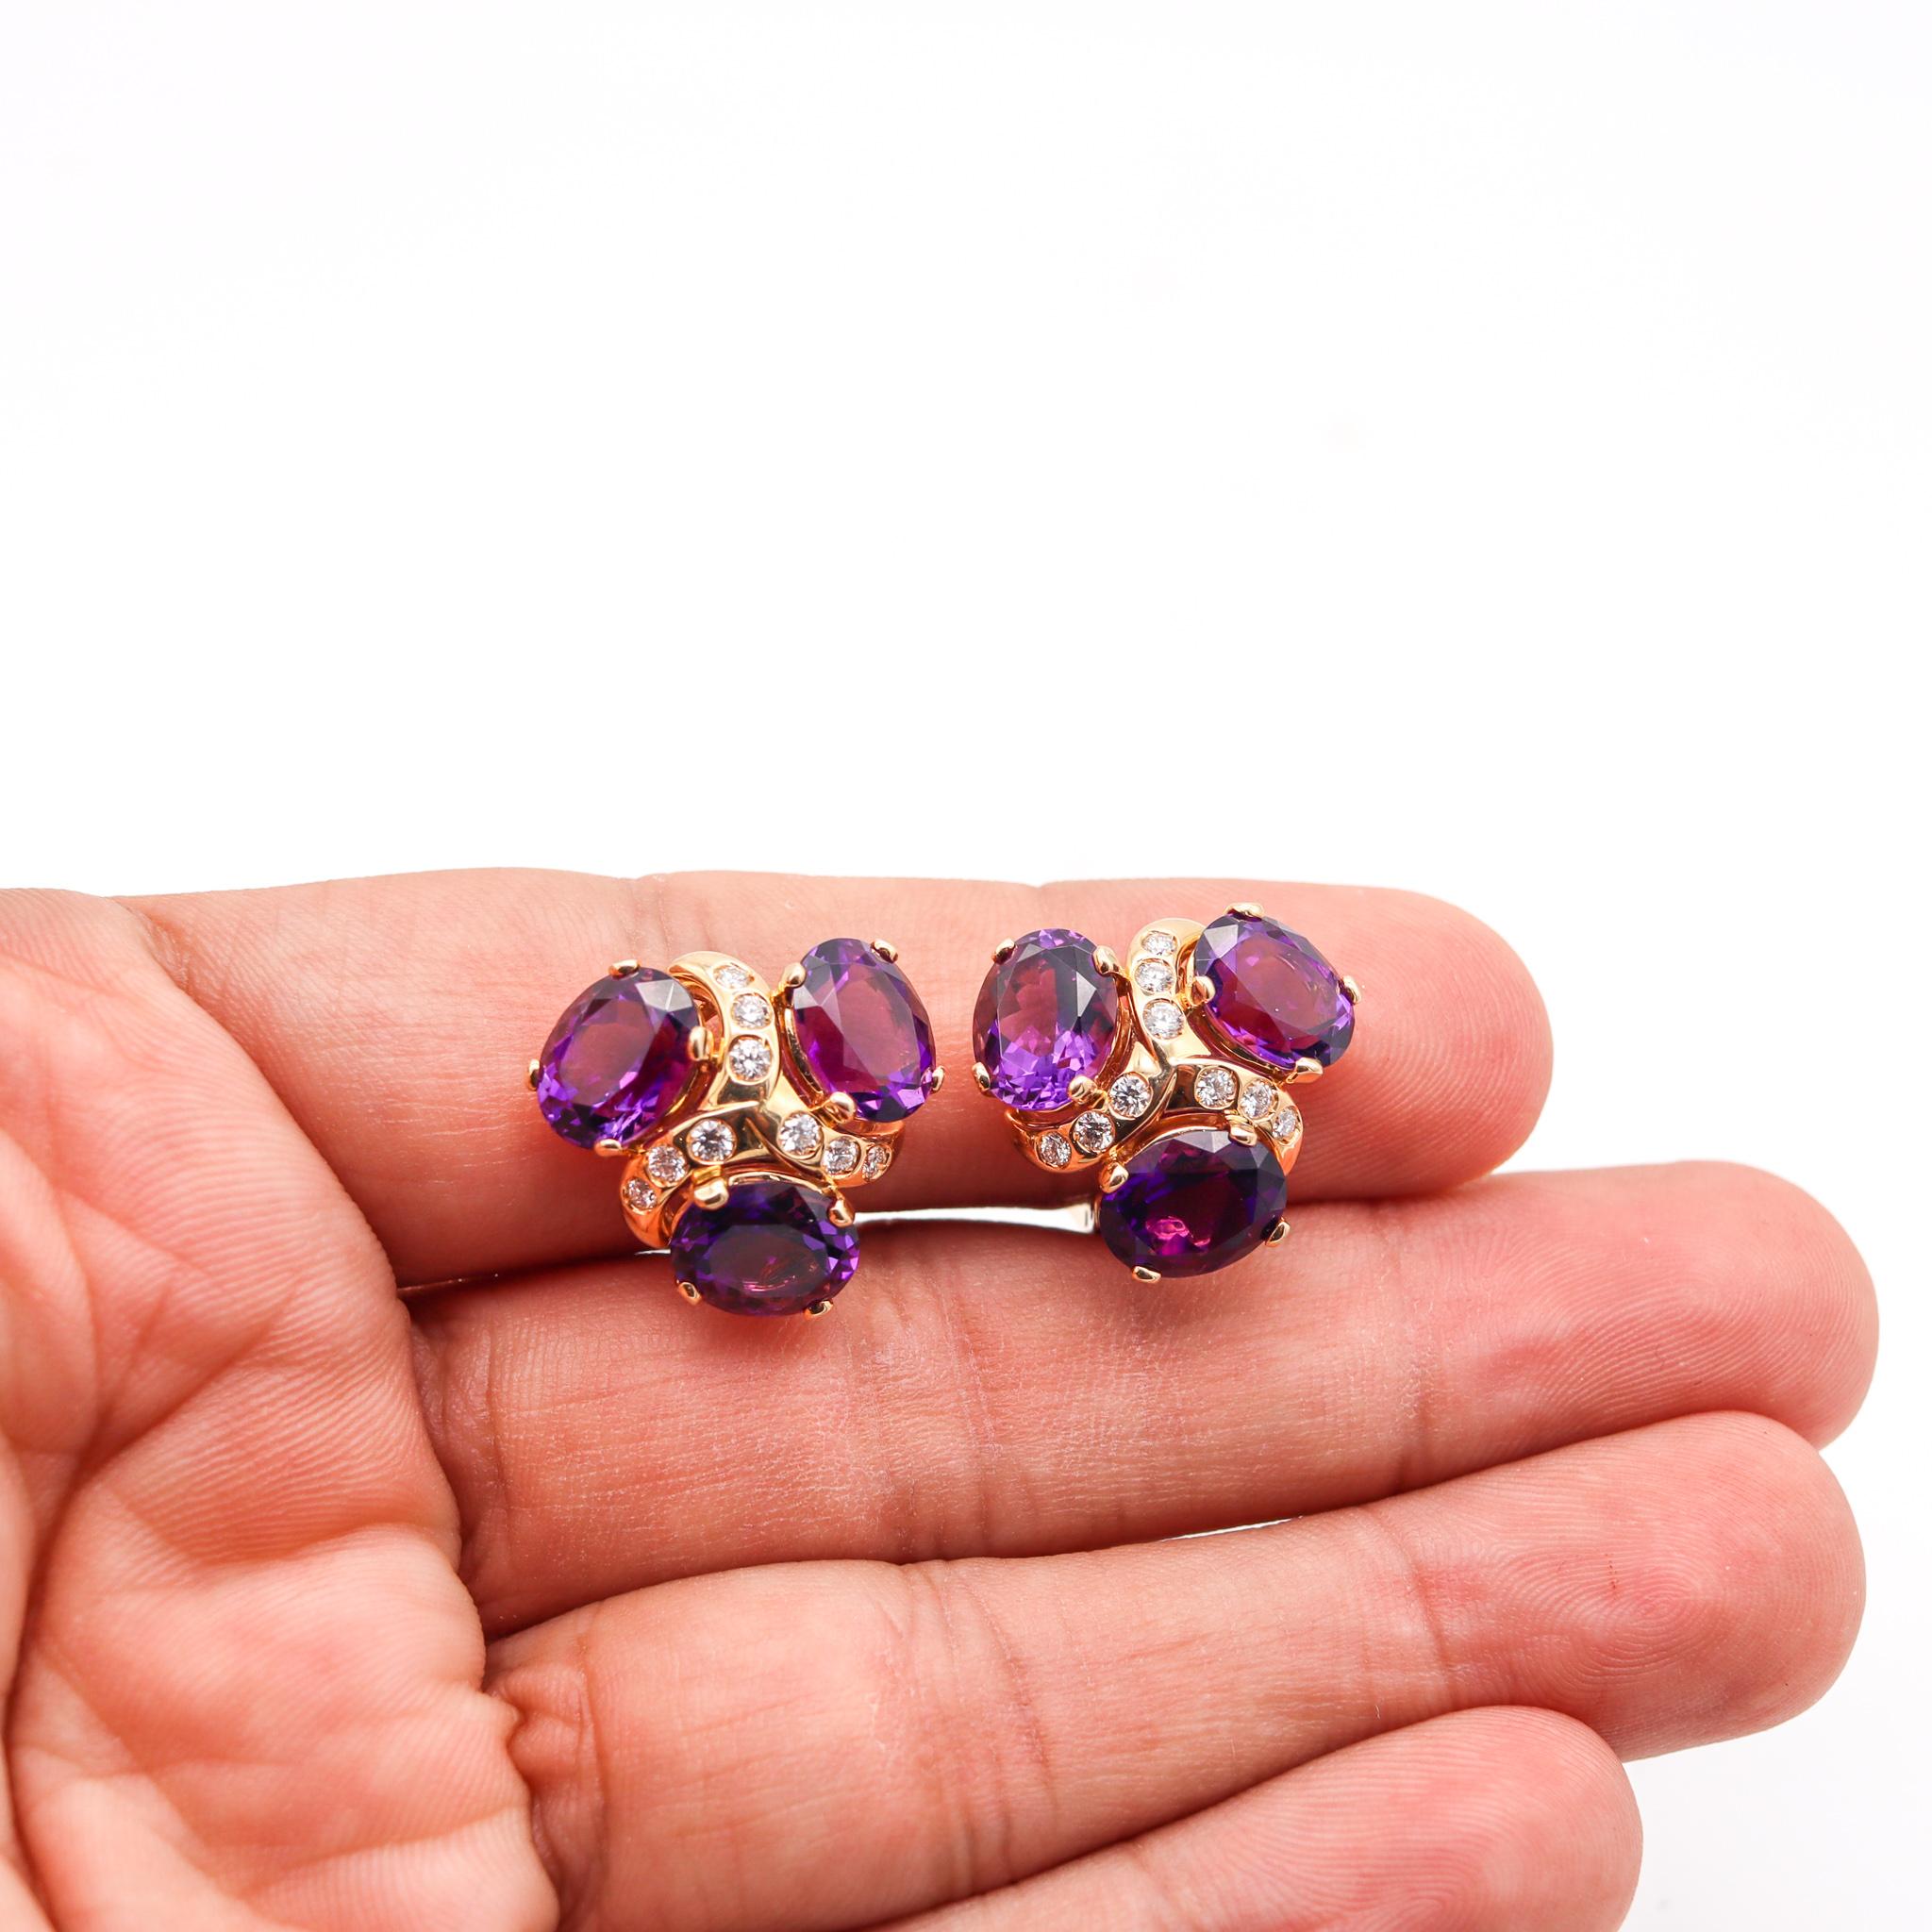 Women's Verdura Milano Clips Earrings in 18Kt Gold with 17.14 Cts in Diamonds & Amethyst